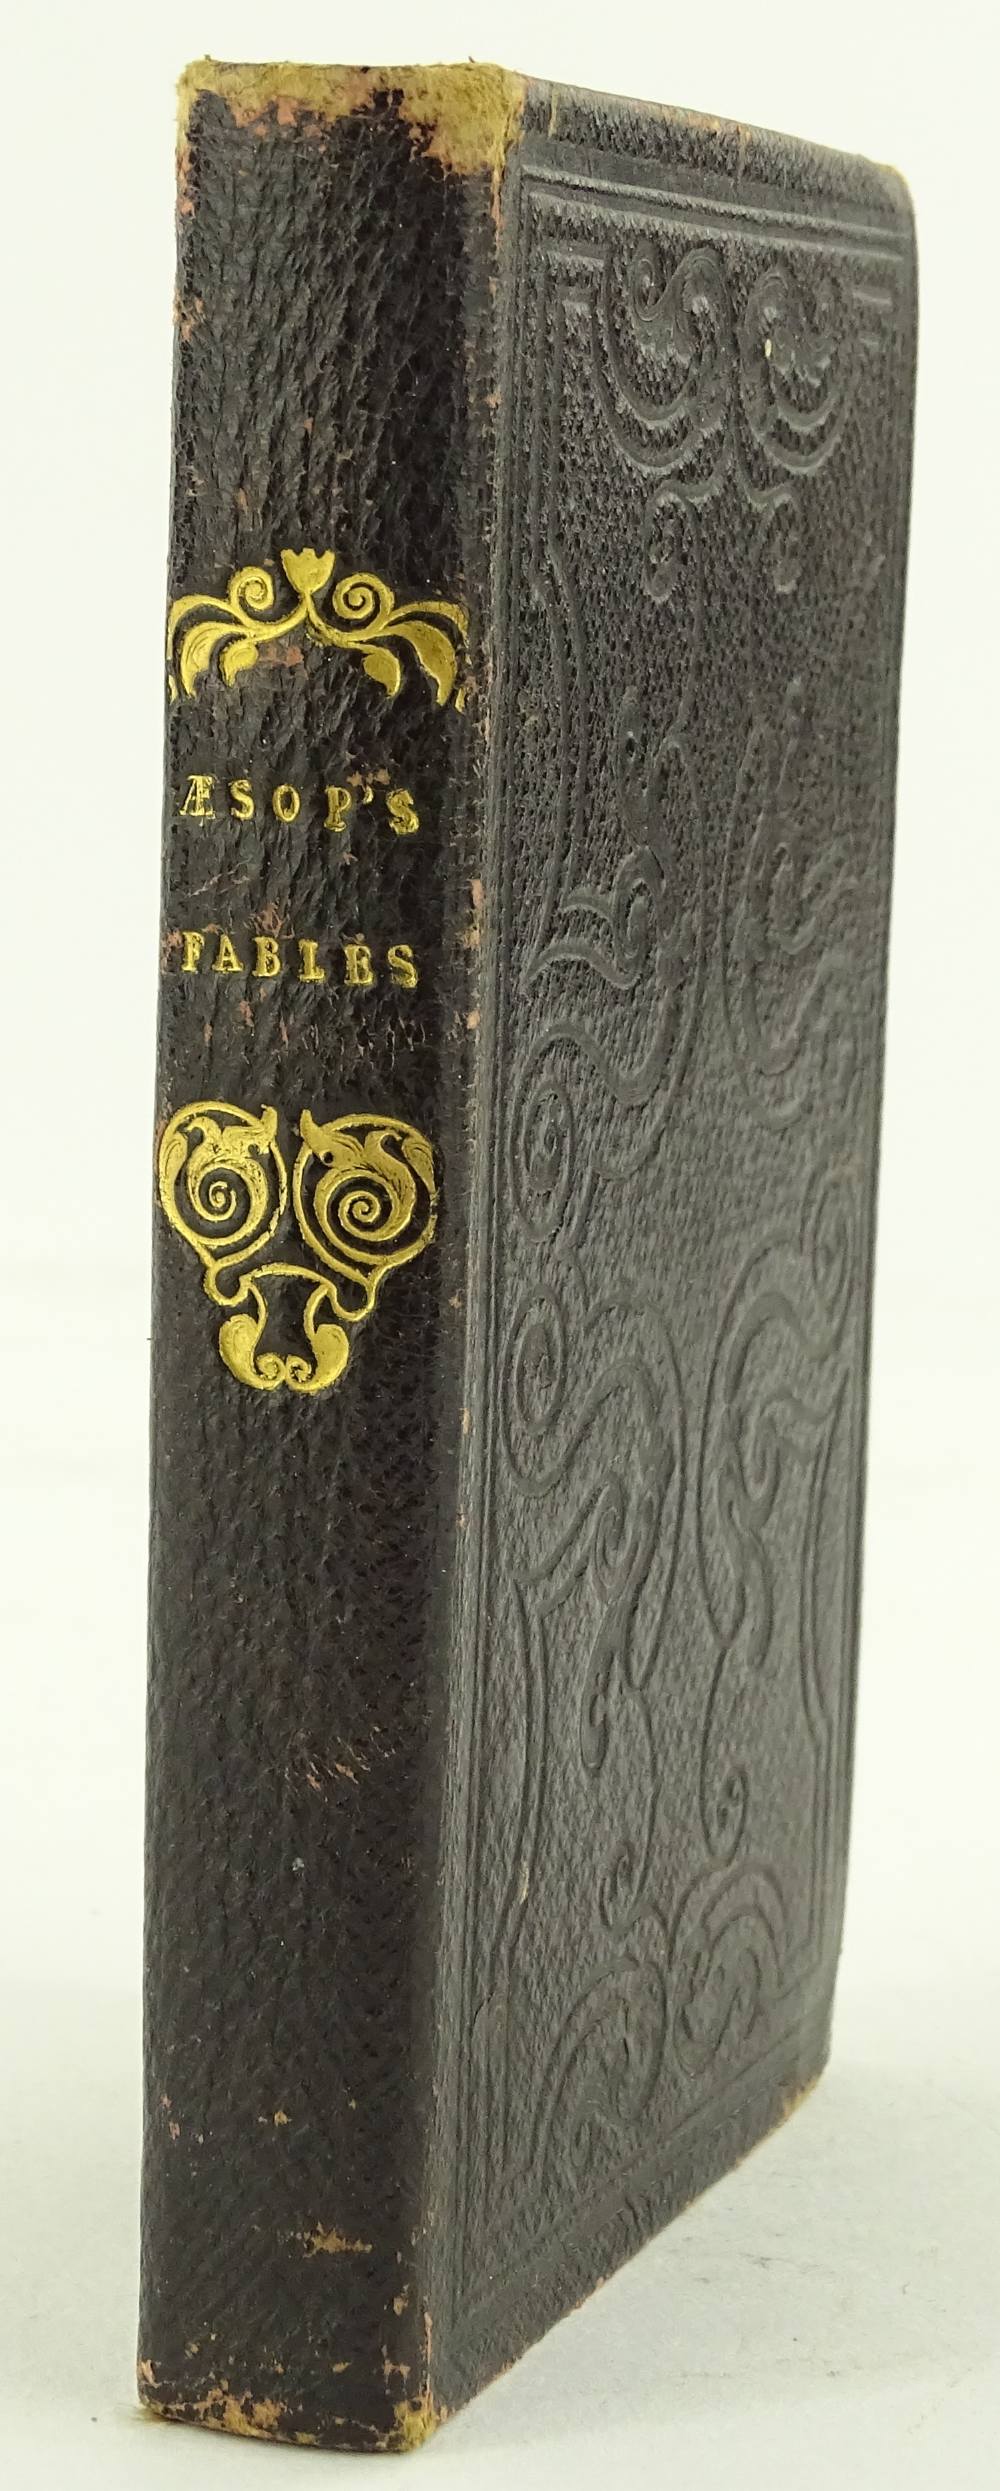 Aesop's Fables, printed for Joseph Booker 1828, 15 - Image 3 of 3